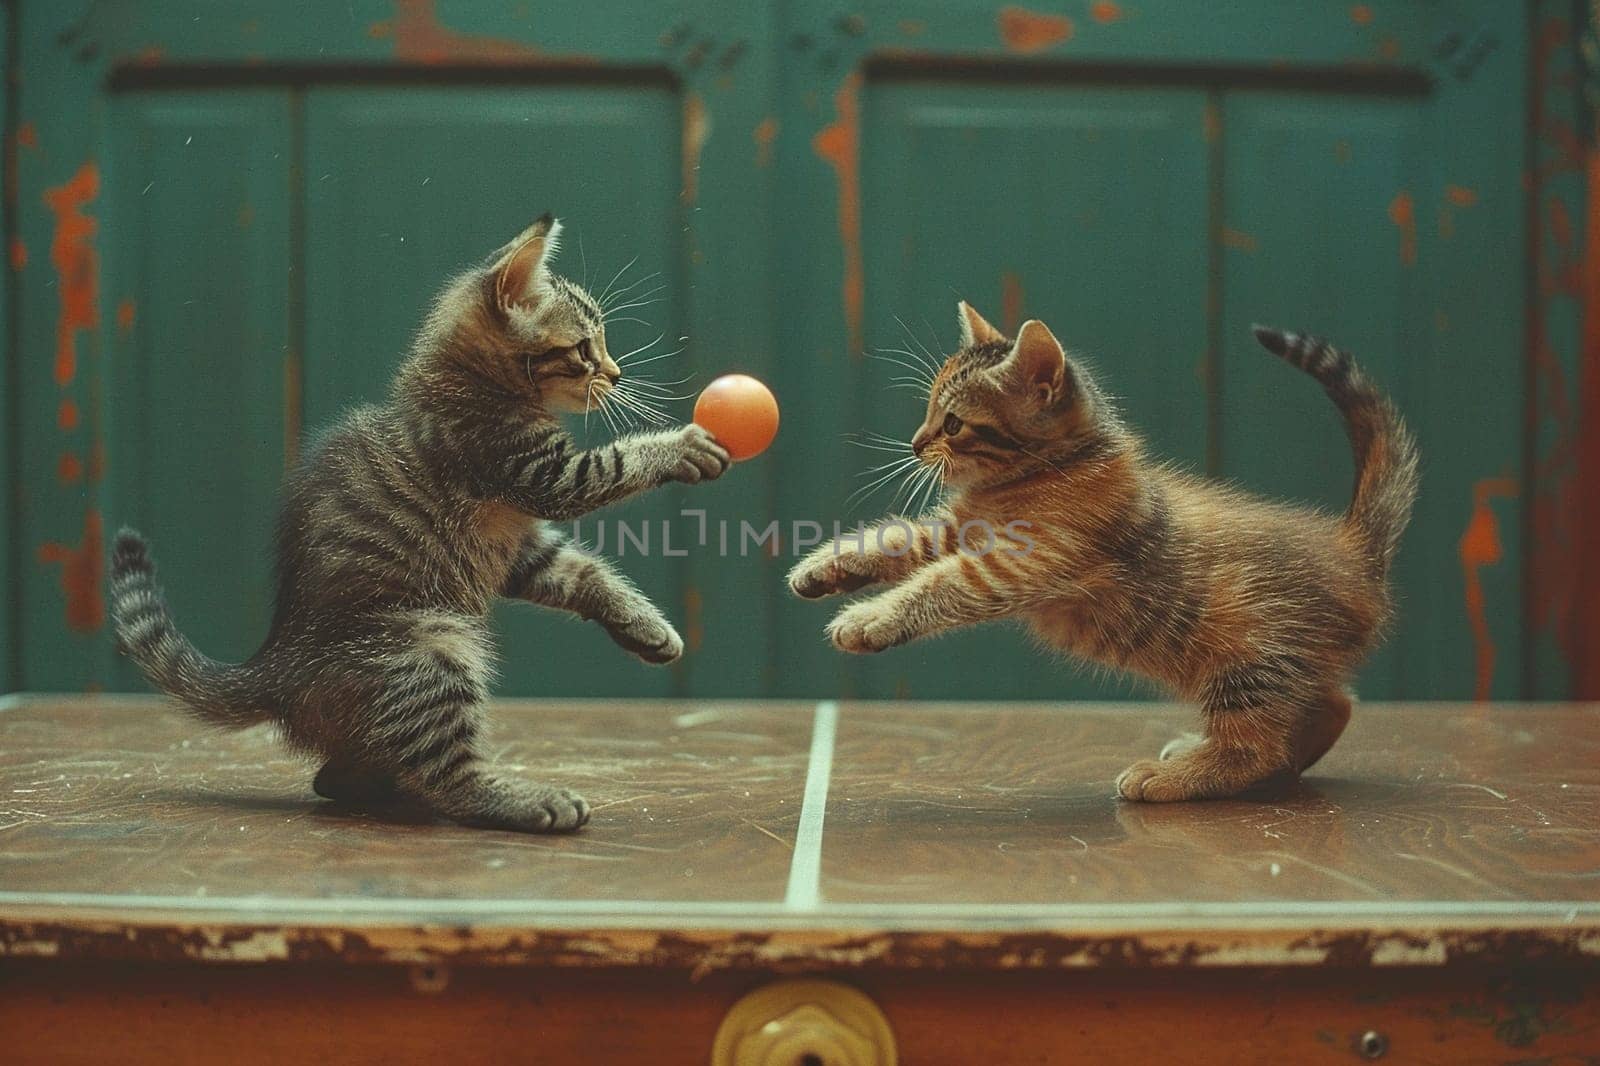 Two gray kittens play ping pong on a tennis table.